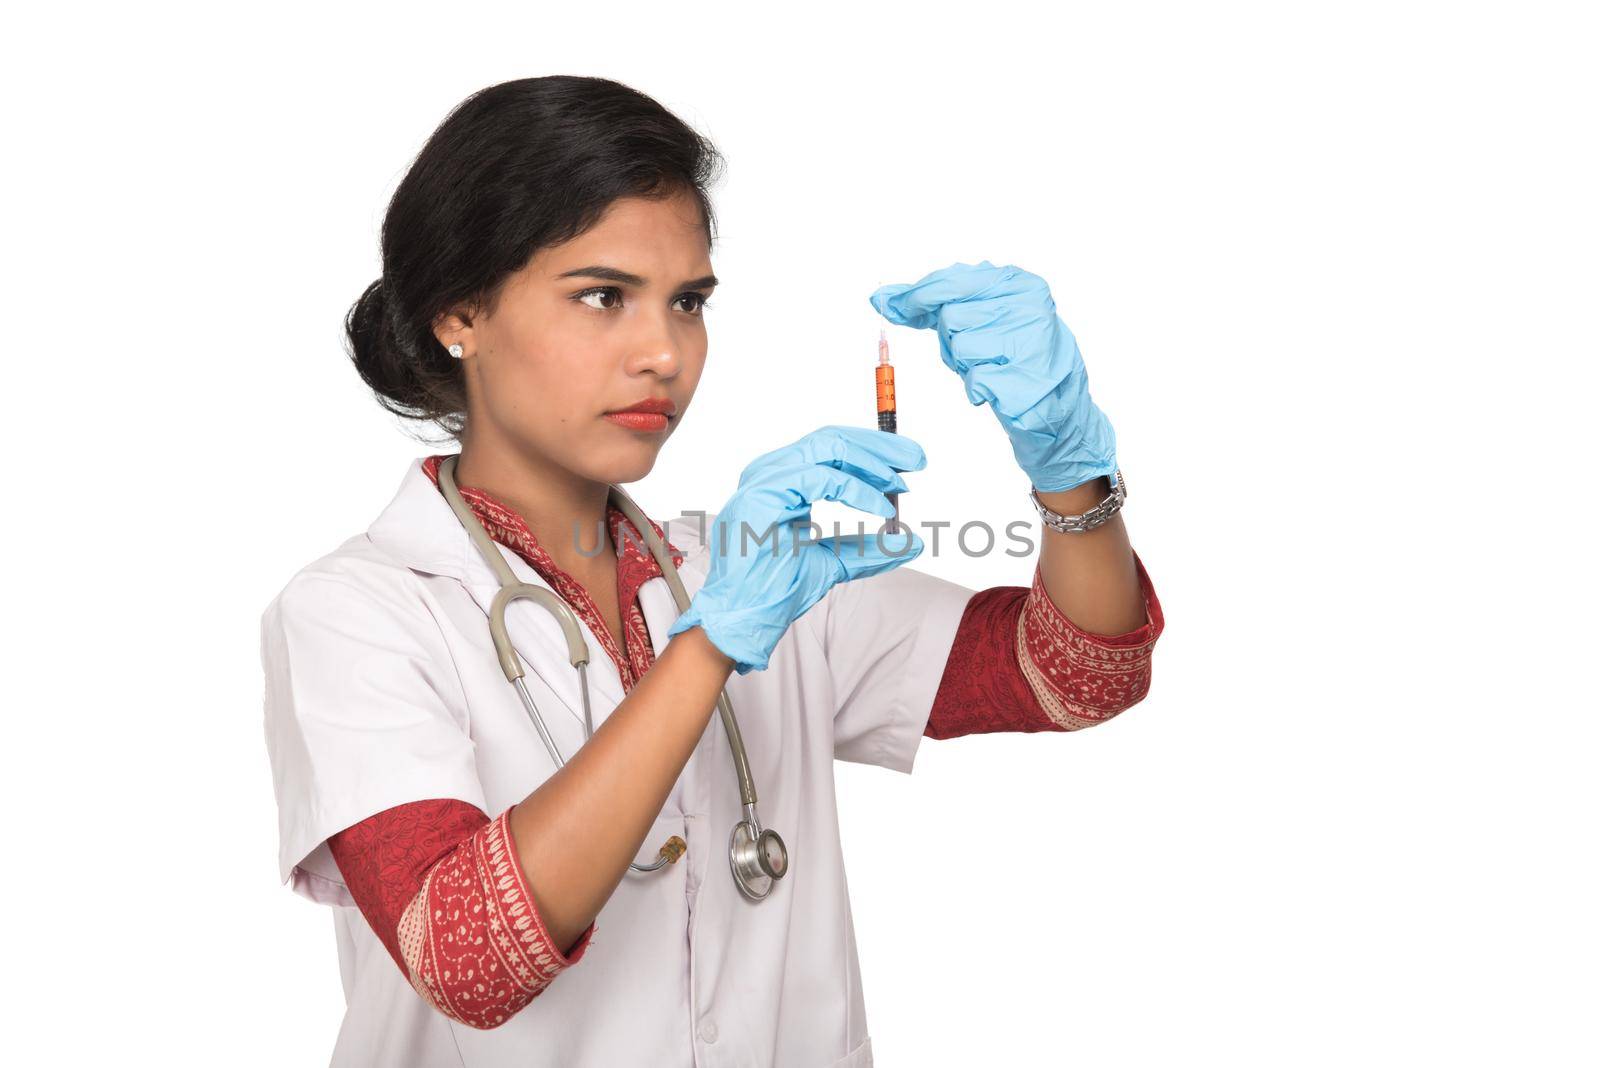 A female doctor with a stethoscope is holding an Injection or Syringe.